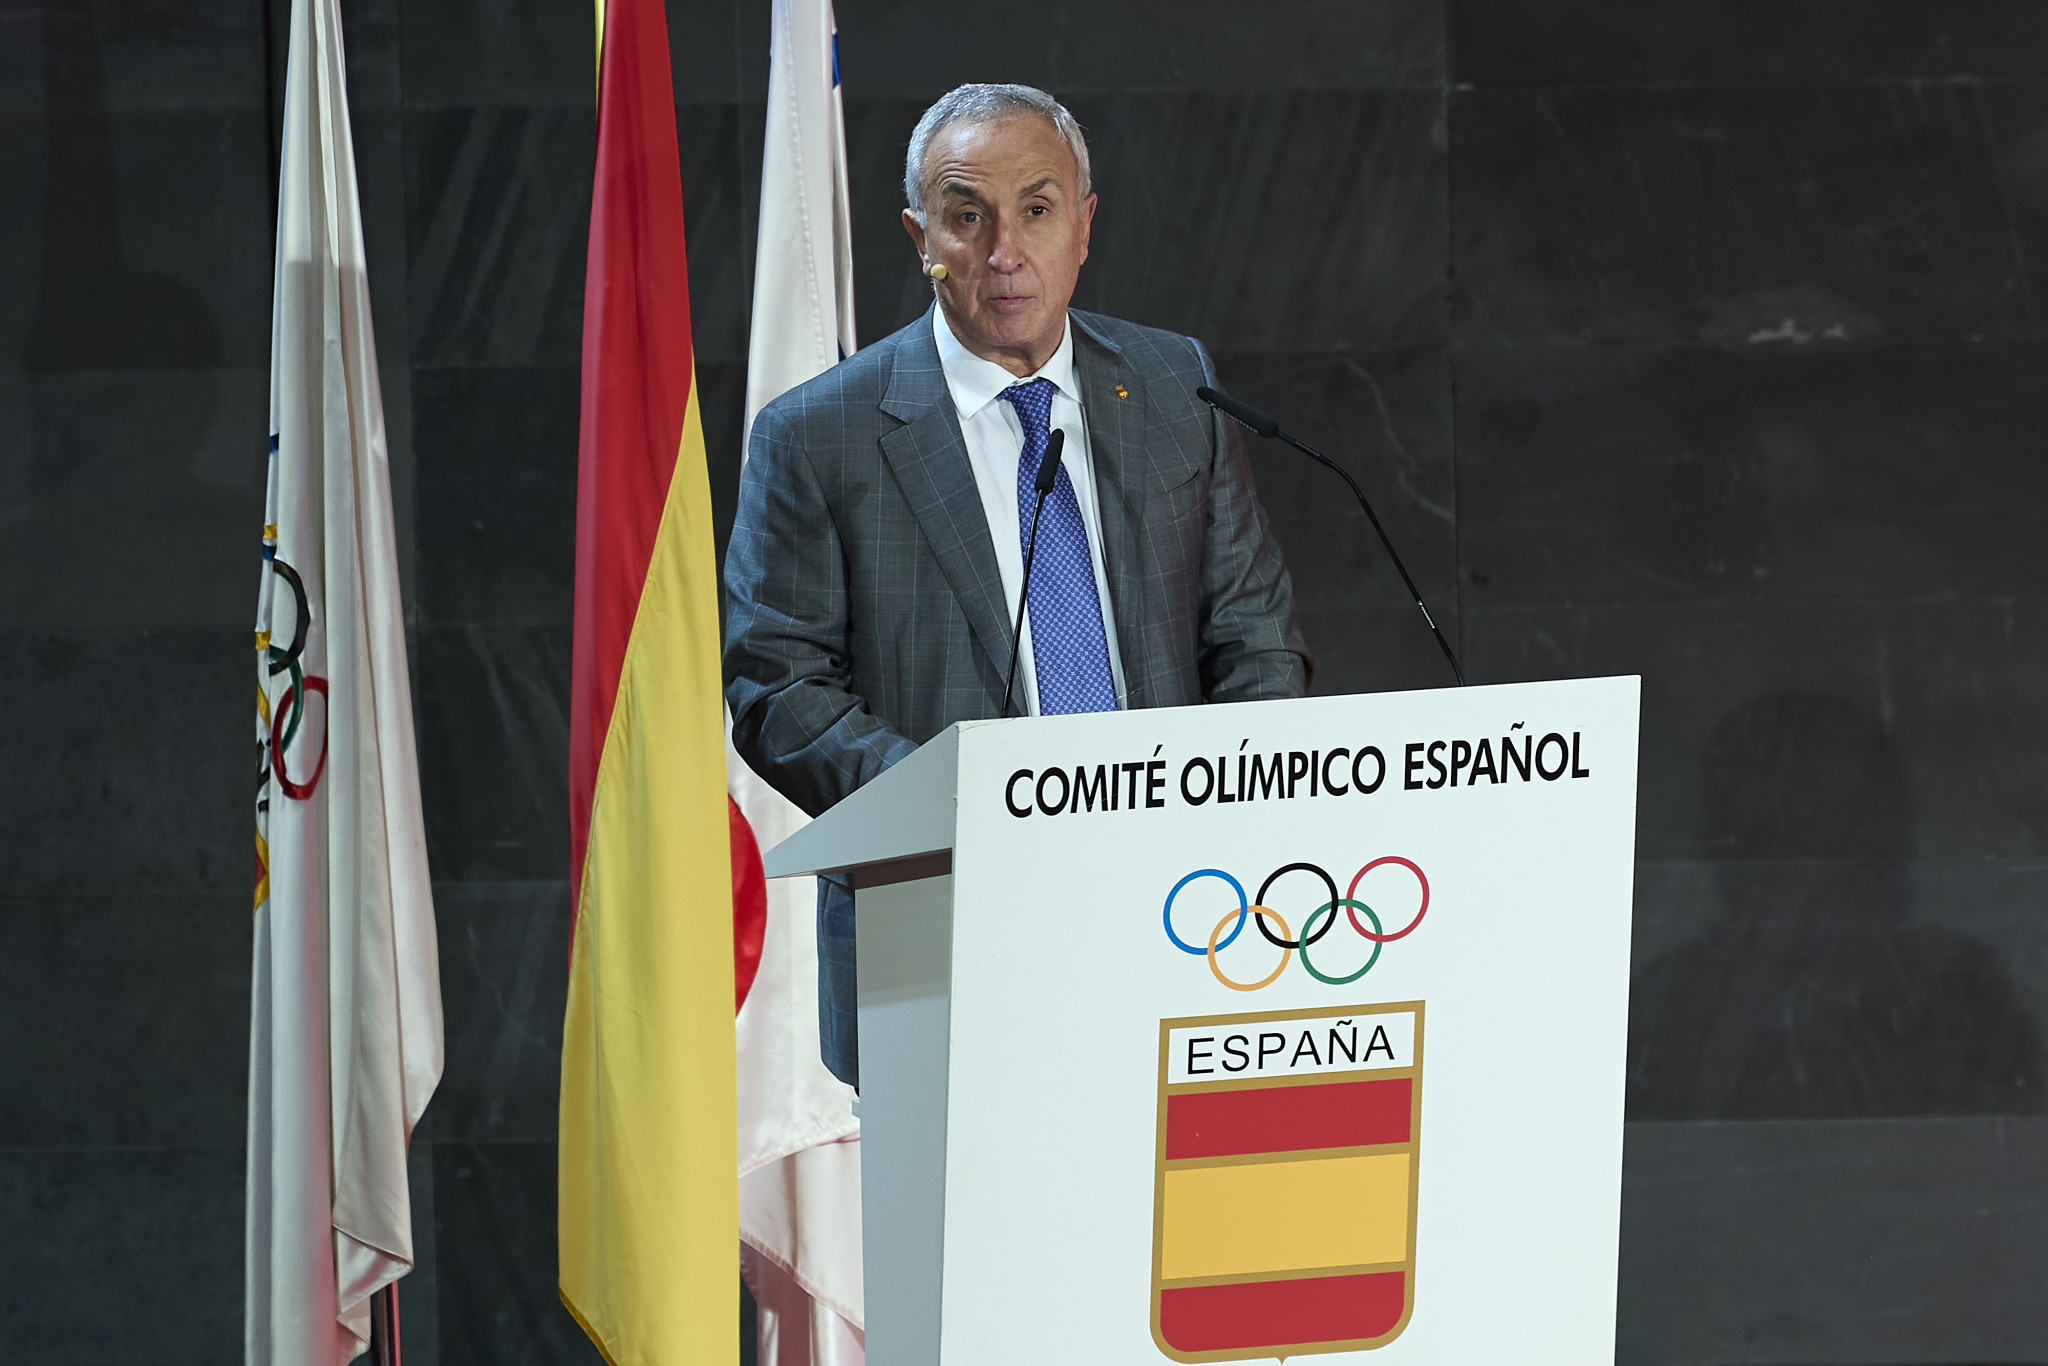 Alejandro Blanco announced Spain's 2030 bid had been officially scrapped ©Getty Images